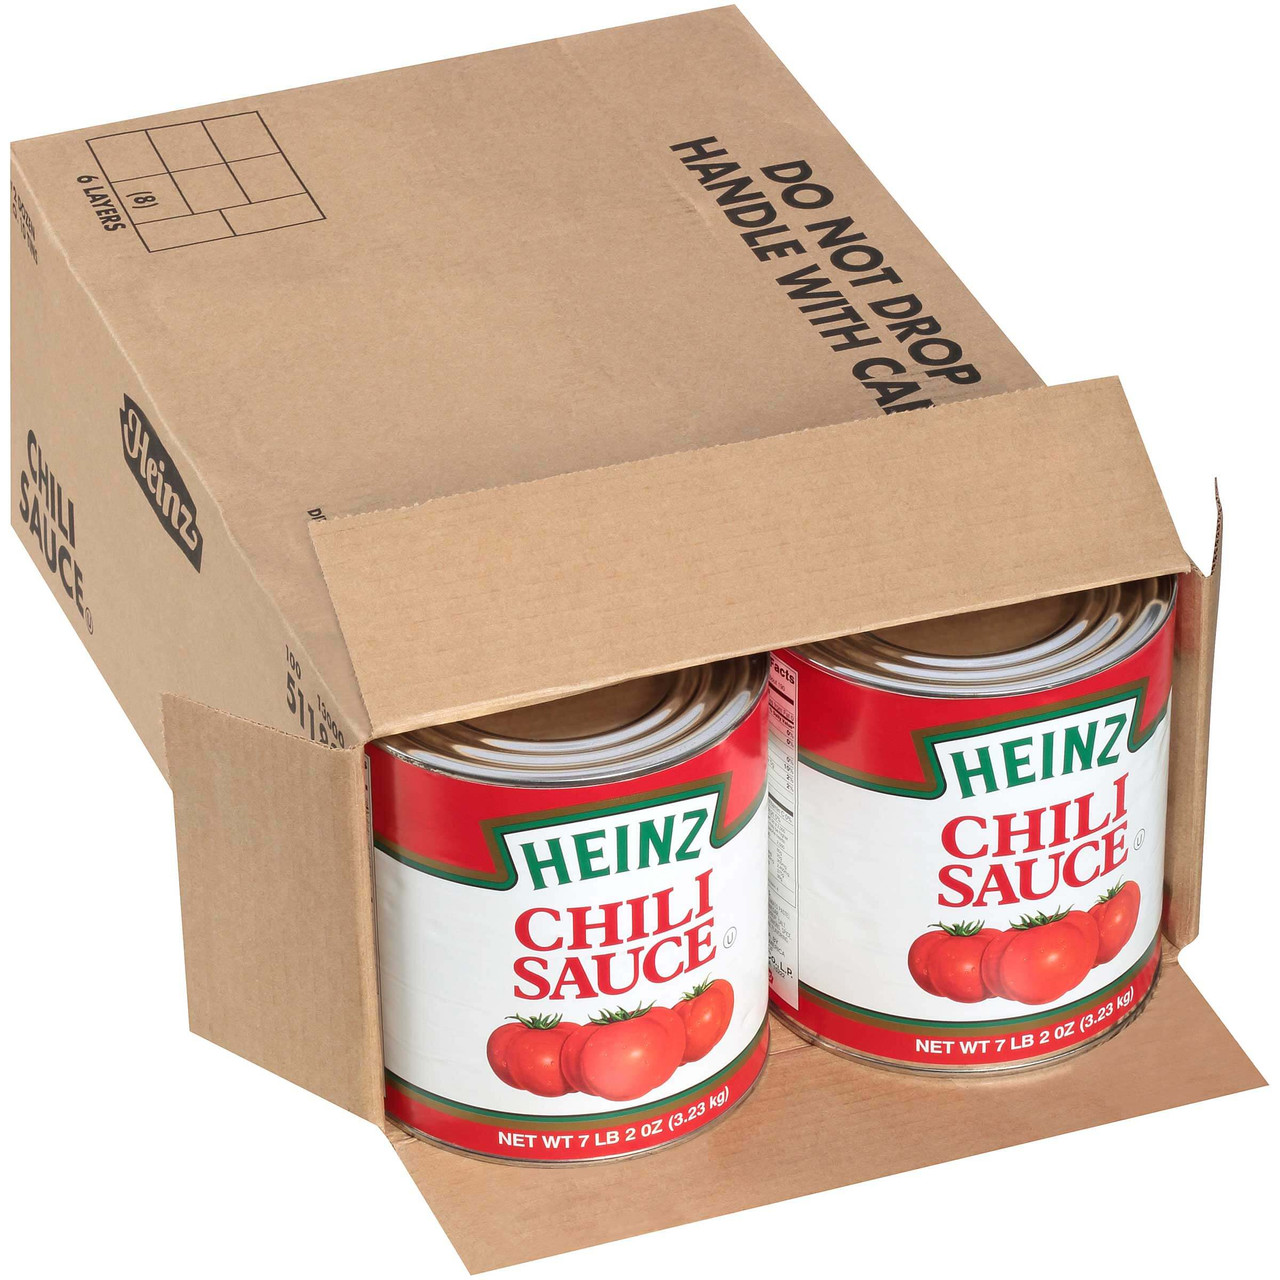 Heinz Chili Tomato Sauce Cans 3.23Kgs/7lbs- 6/CASE